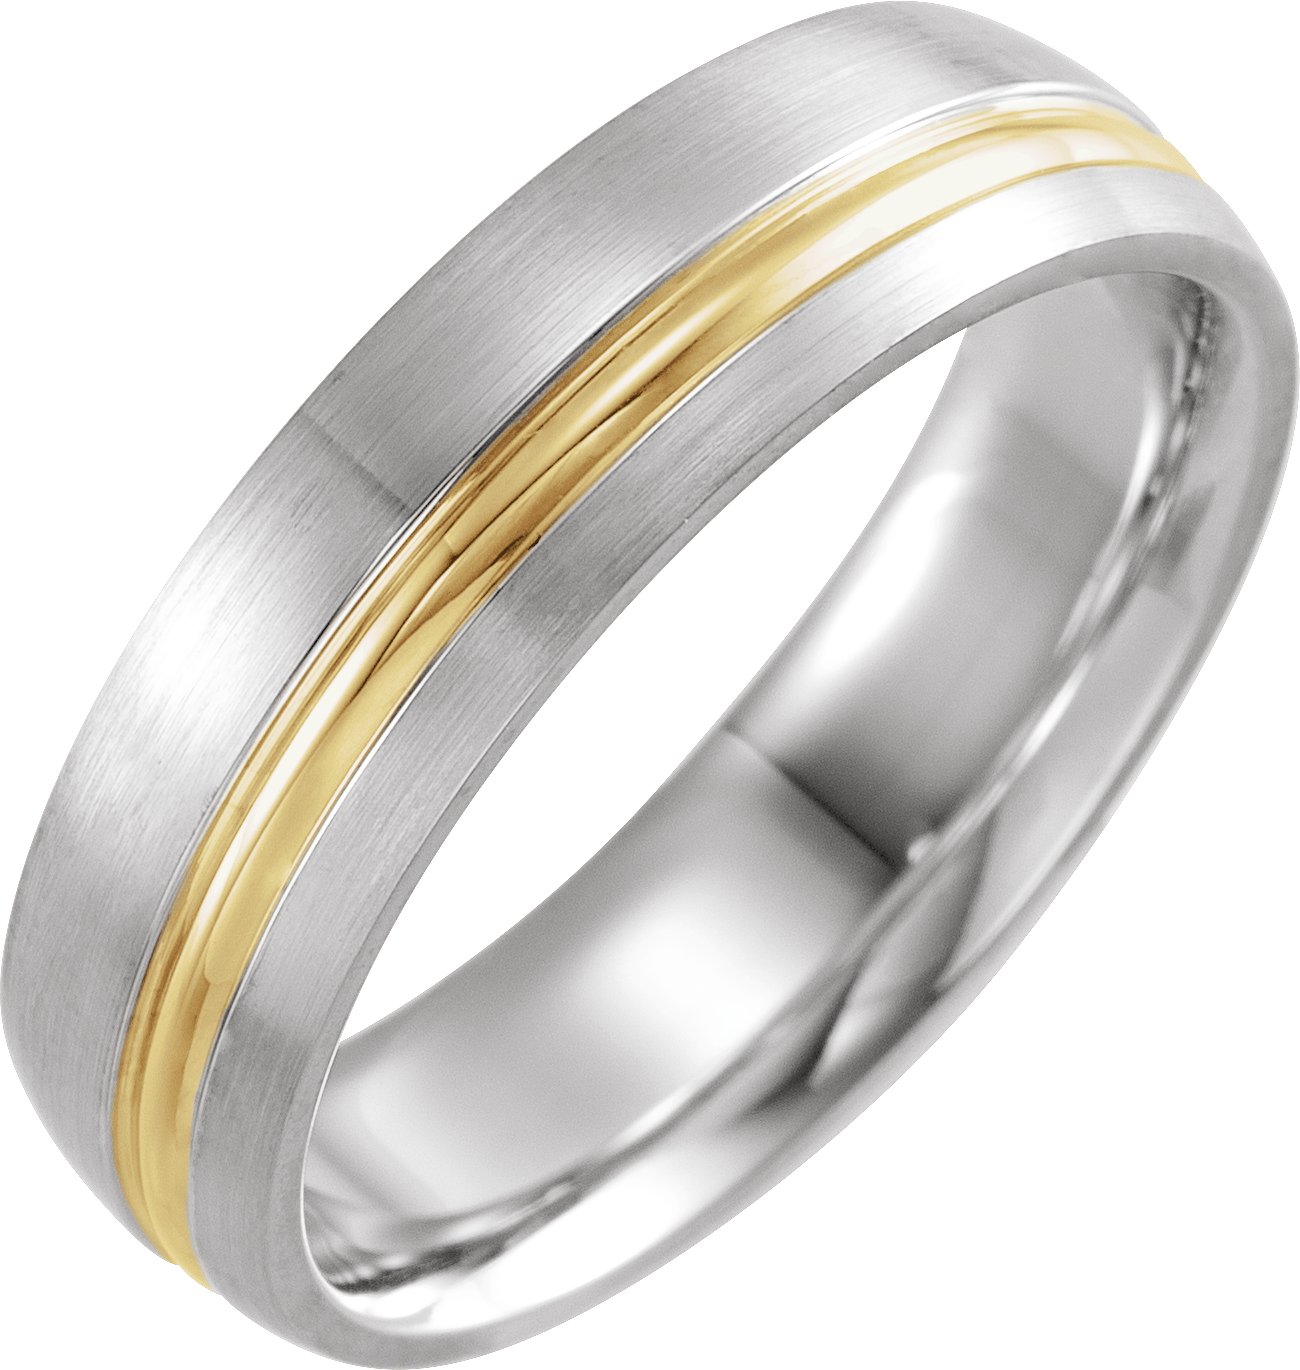 14K White & Yellow 6 mm Grooved Band with Brush Finish Size 8.5